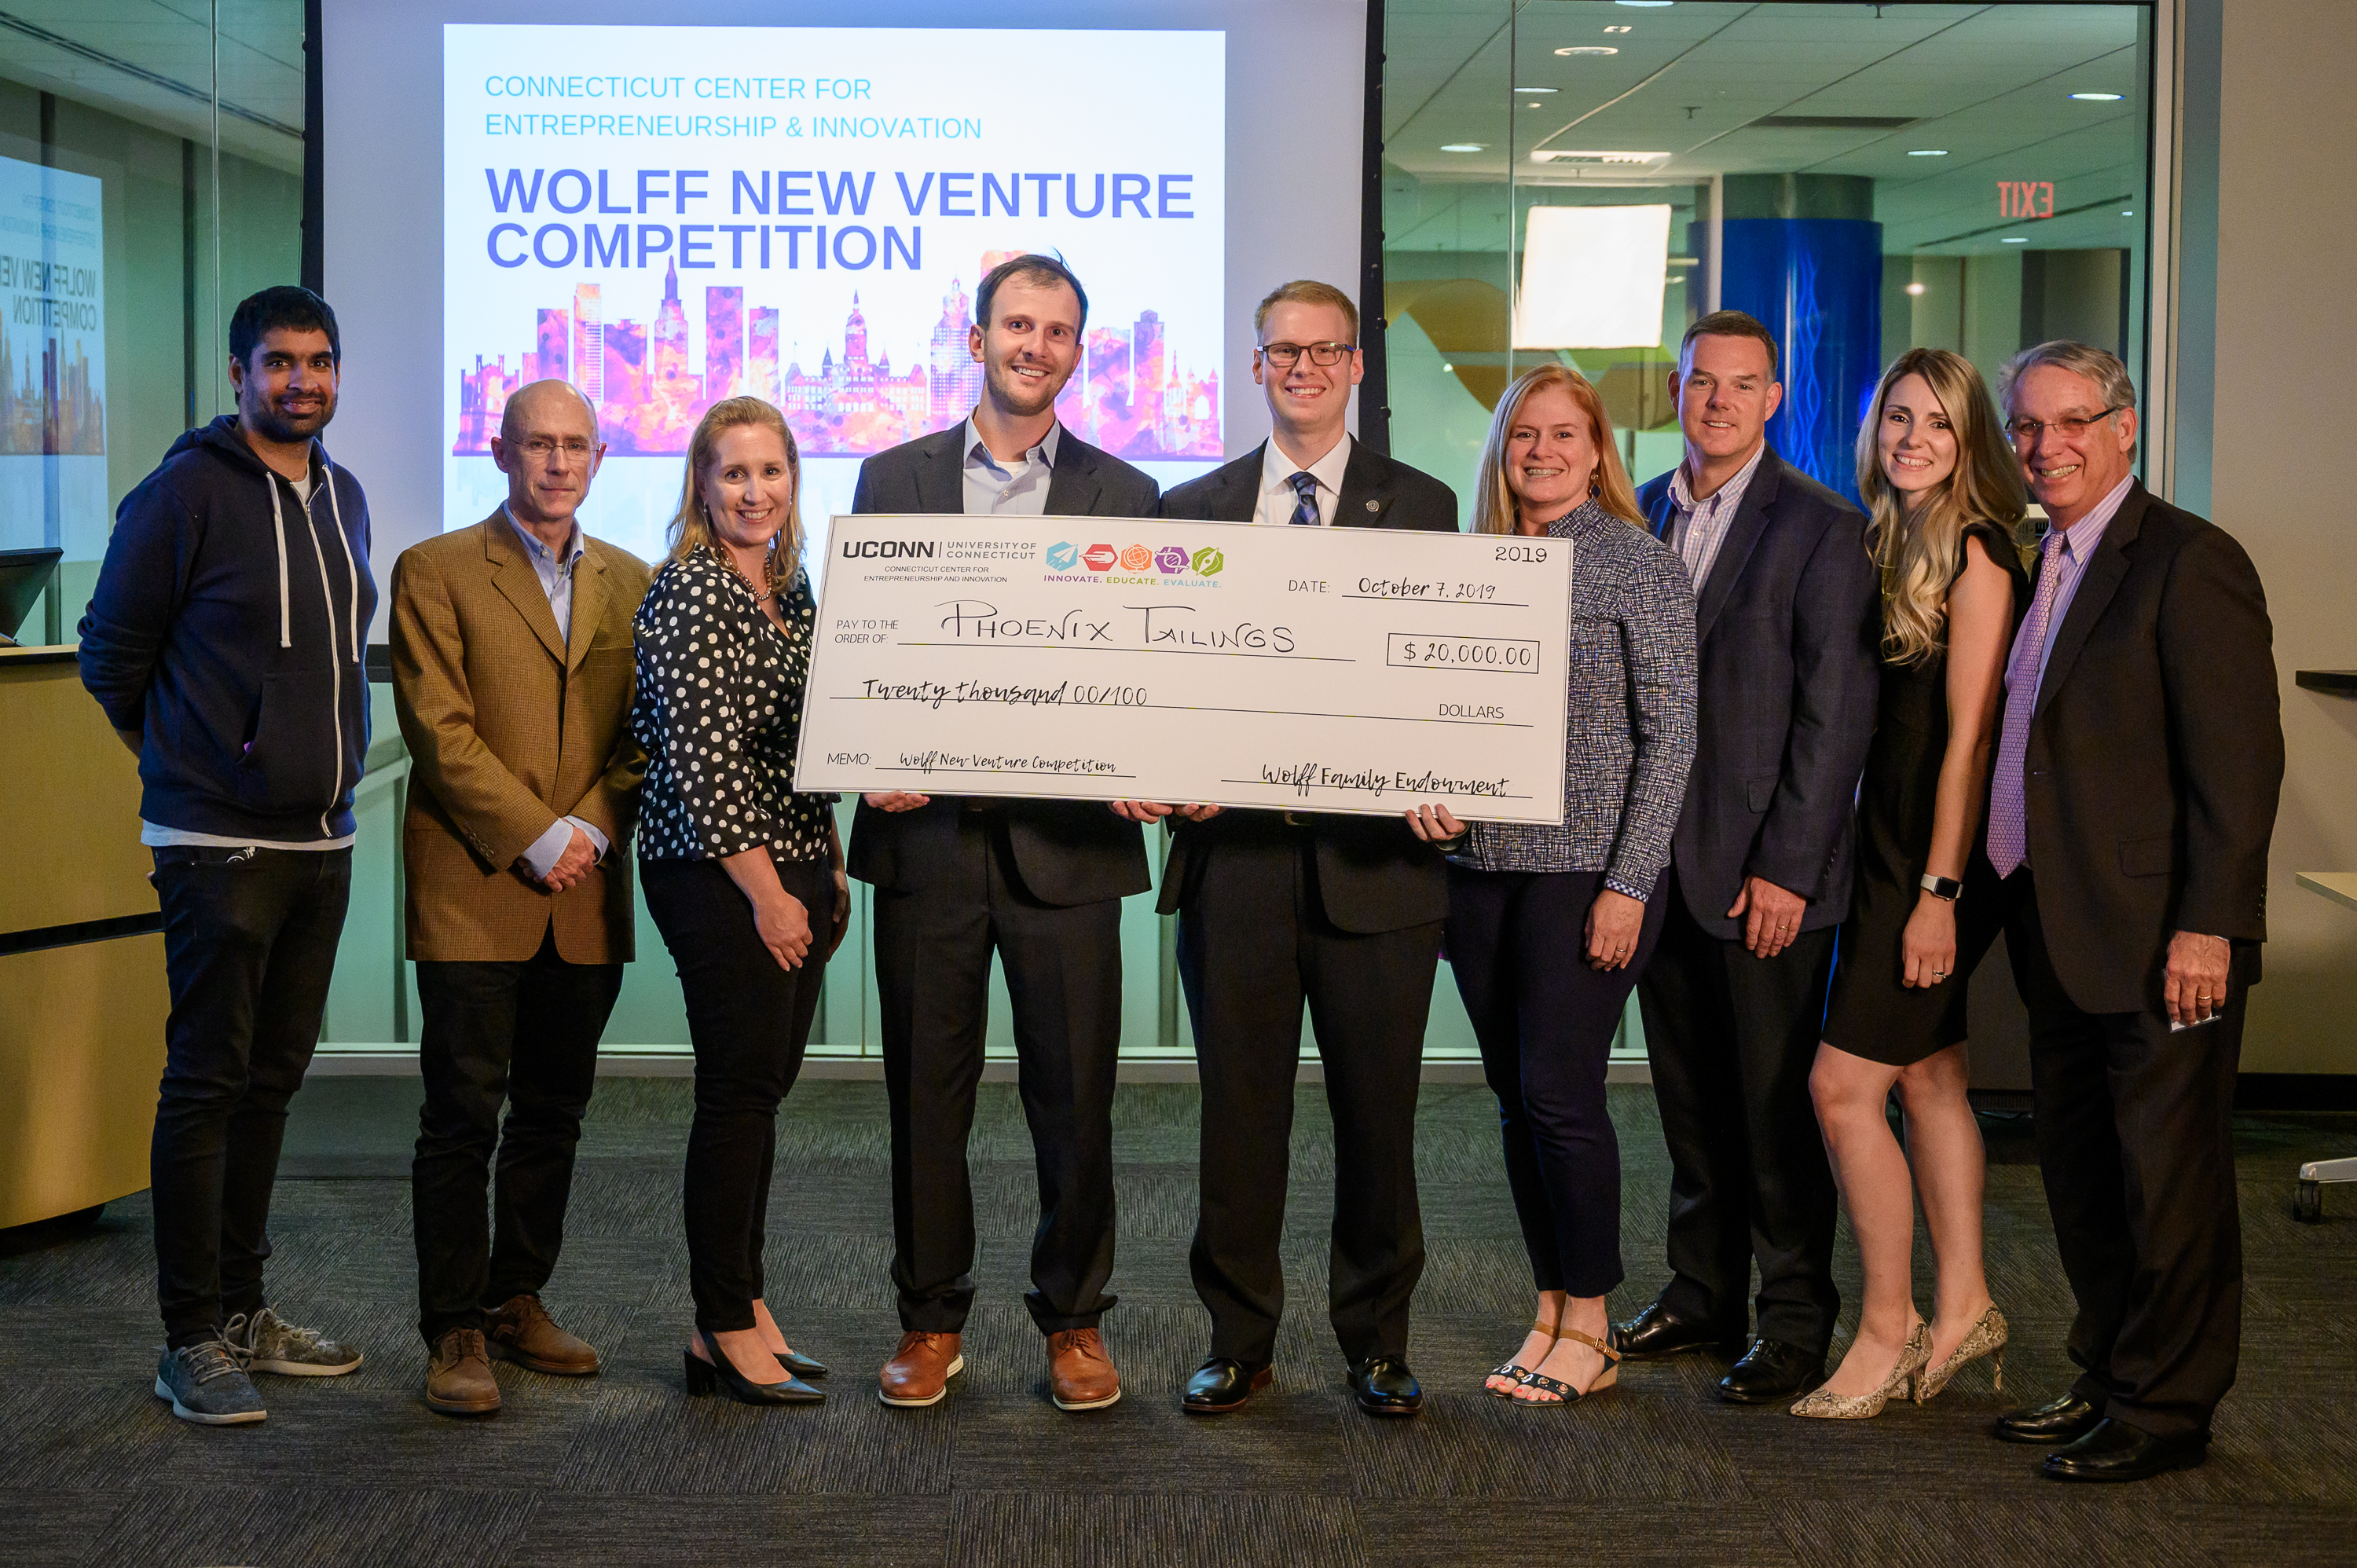 Phoenix Tailings, the group that won the 2019 Wolff New Venture Competition, poses for group photos with the judges.